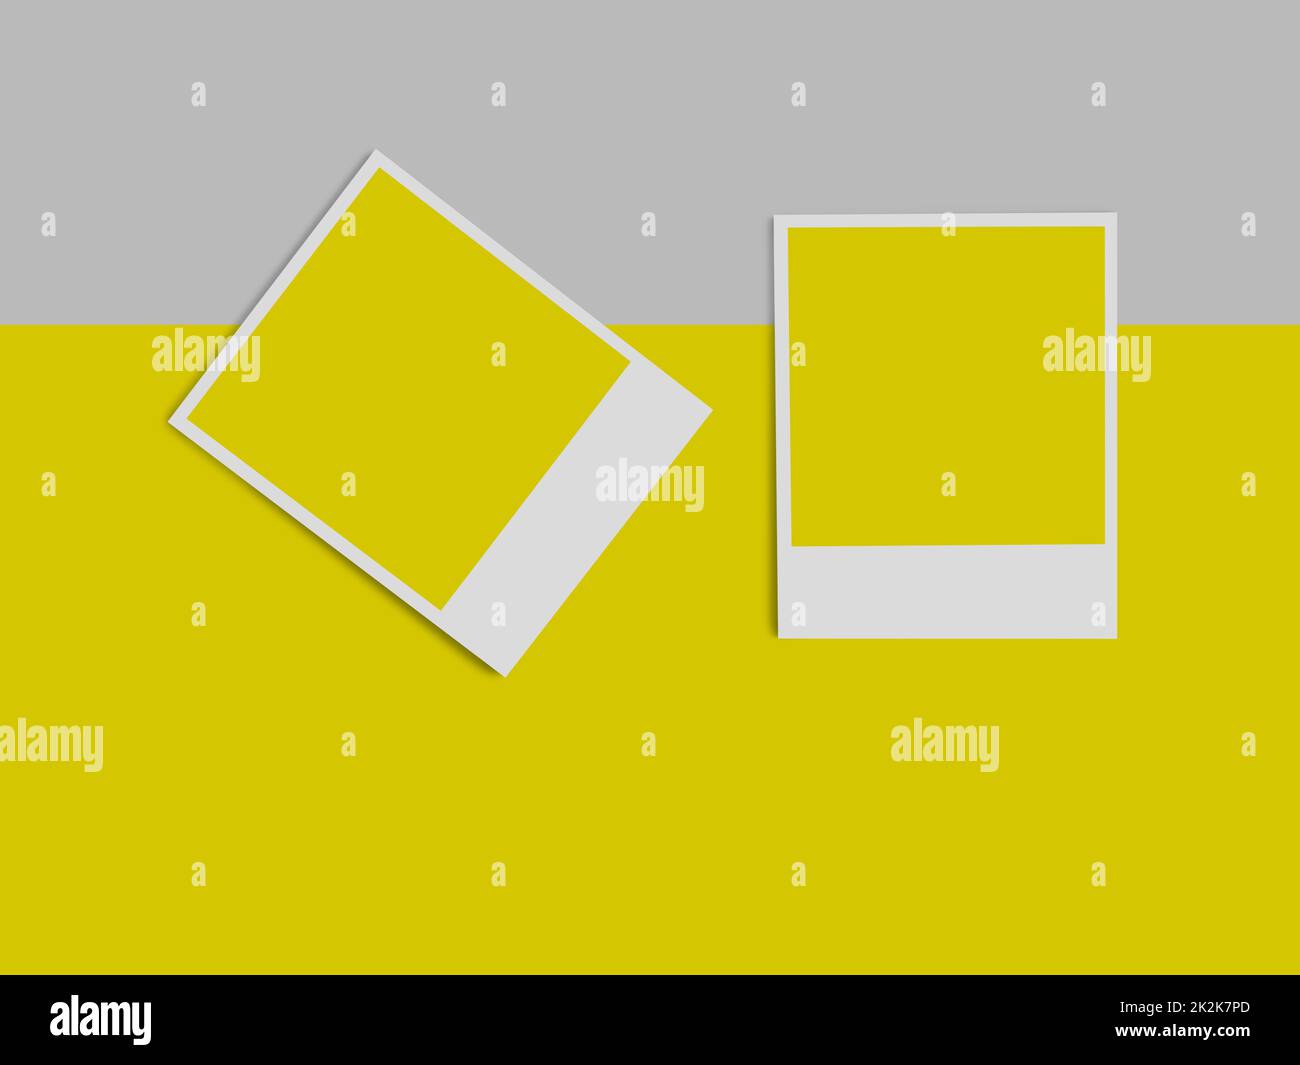 Image frames or color swatches on yellow background mock-up series 432 Stock Photo